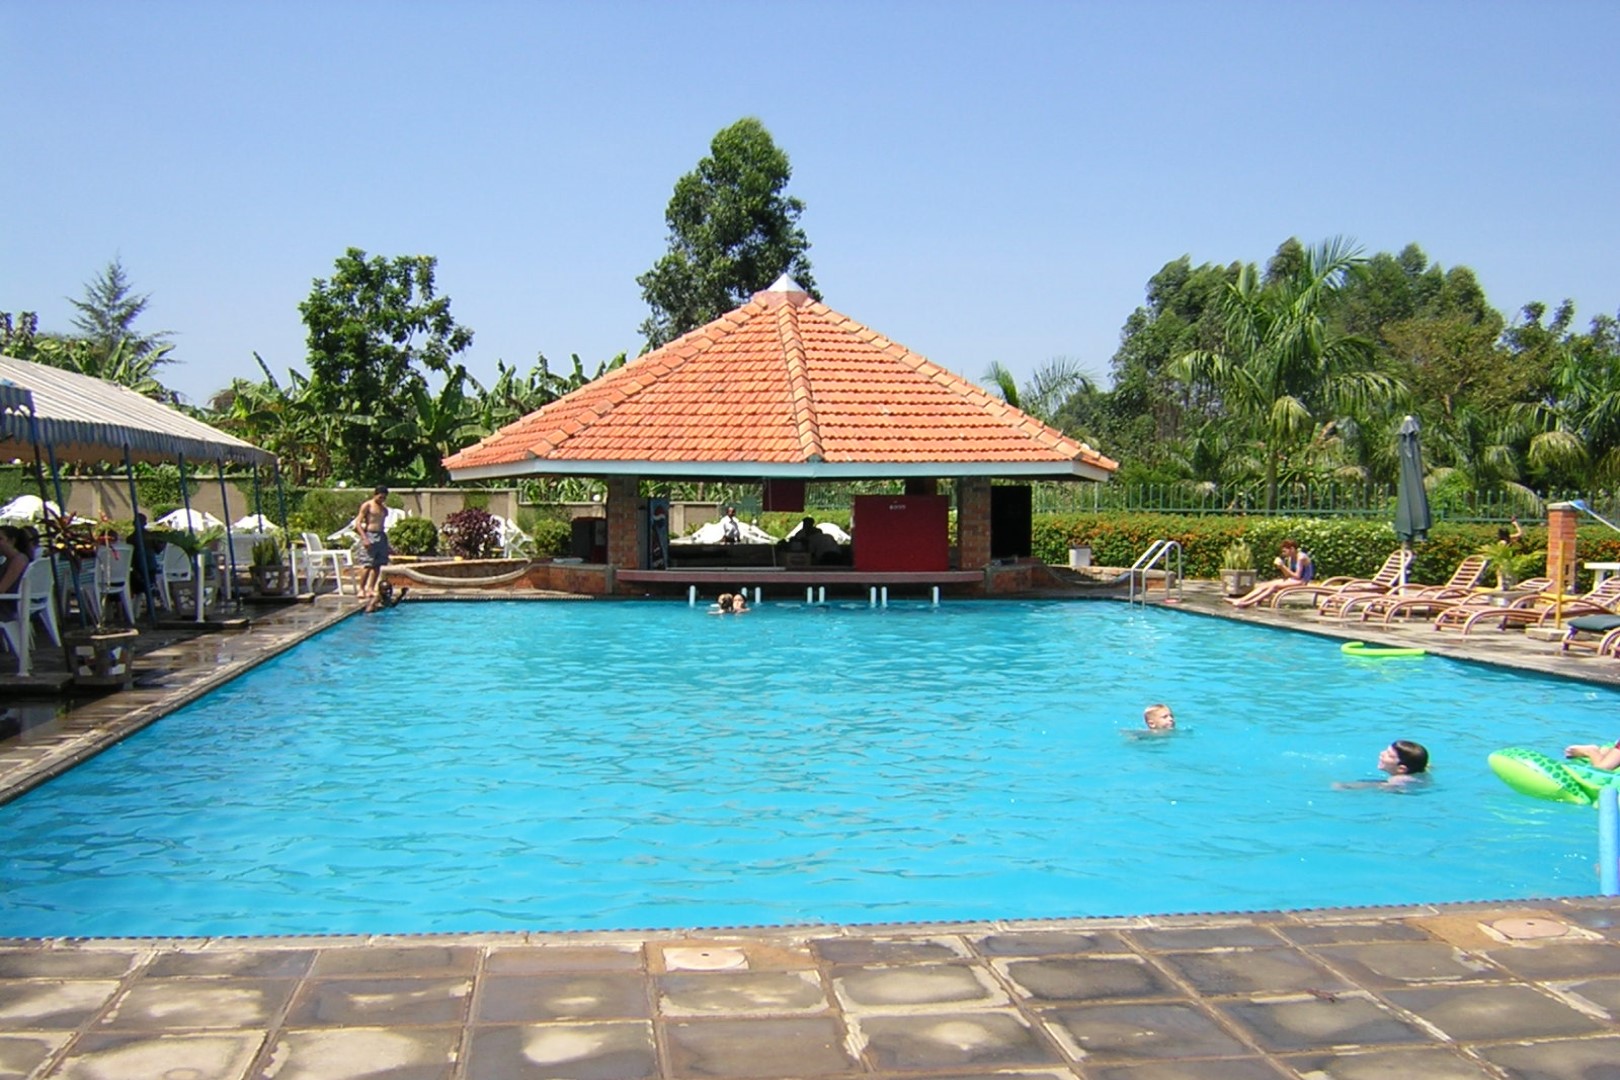 Mbale Resort Hotel, Mbale town near Mount Elgon National Park